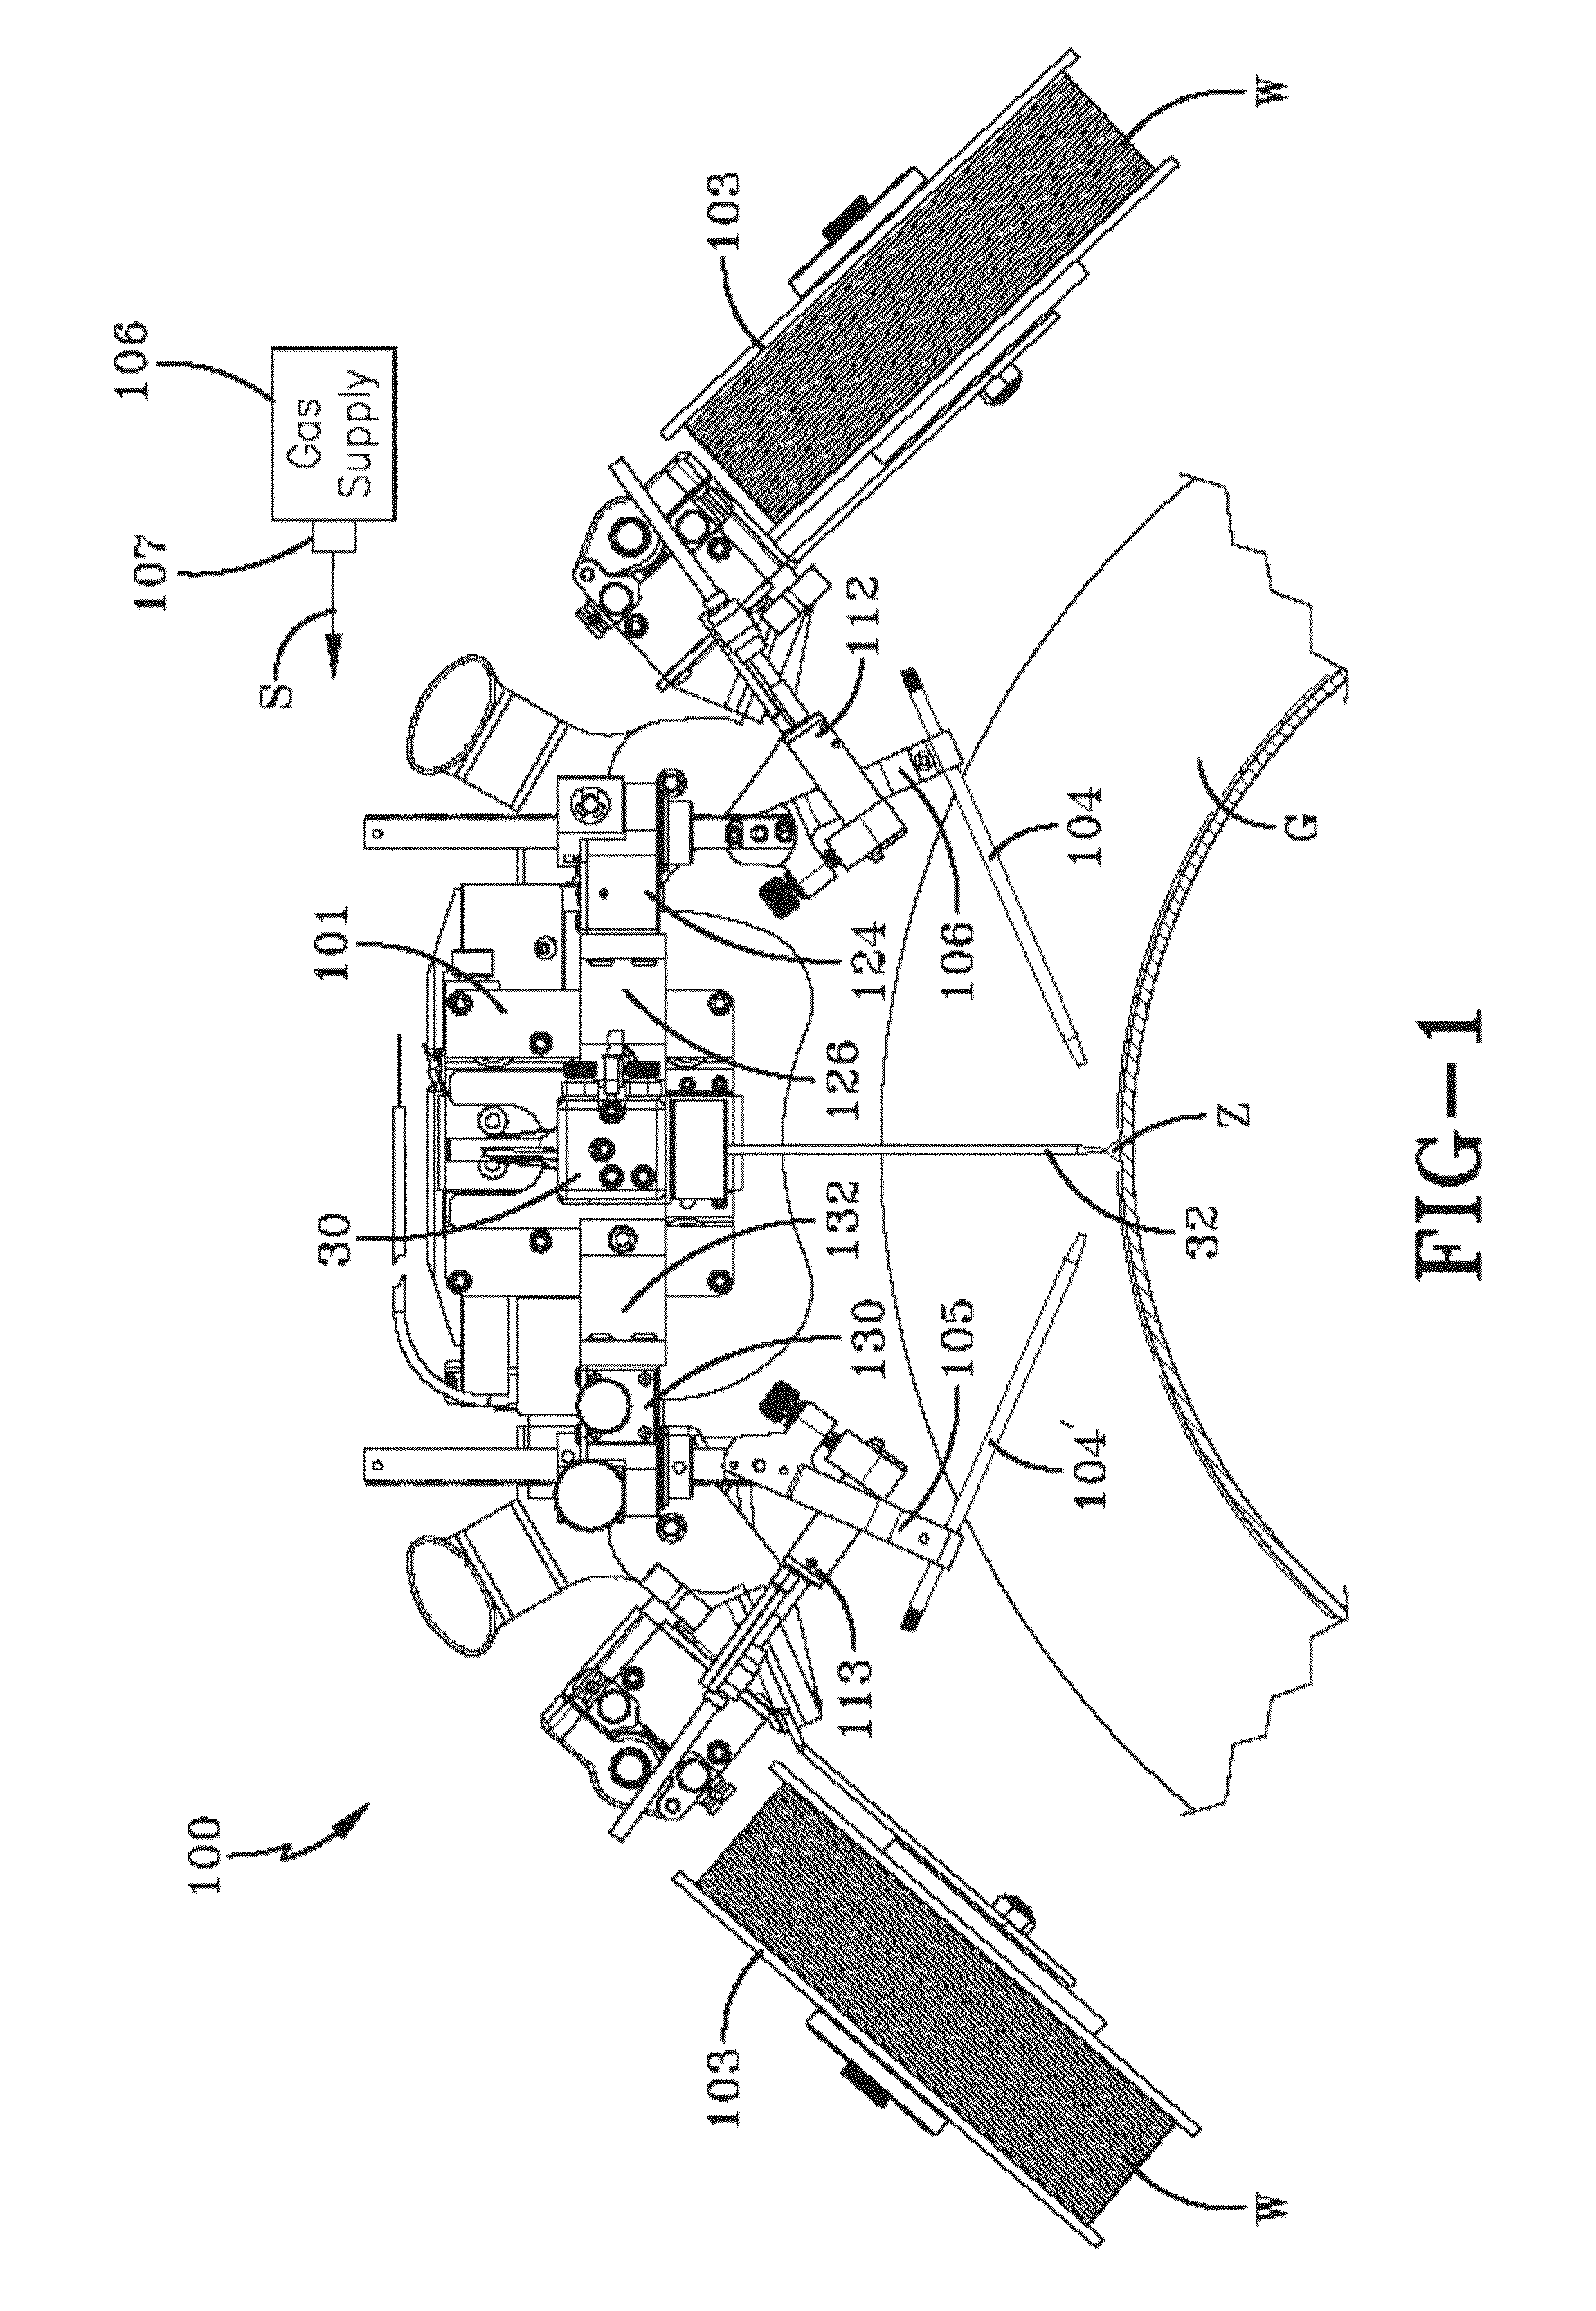 System and method for ground switching